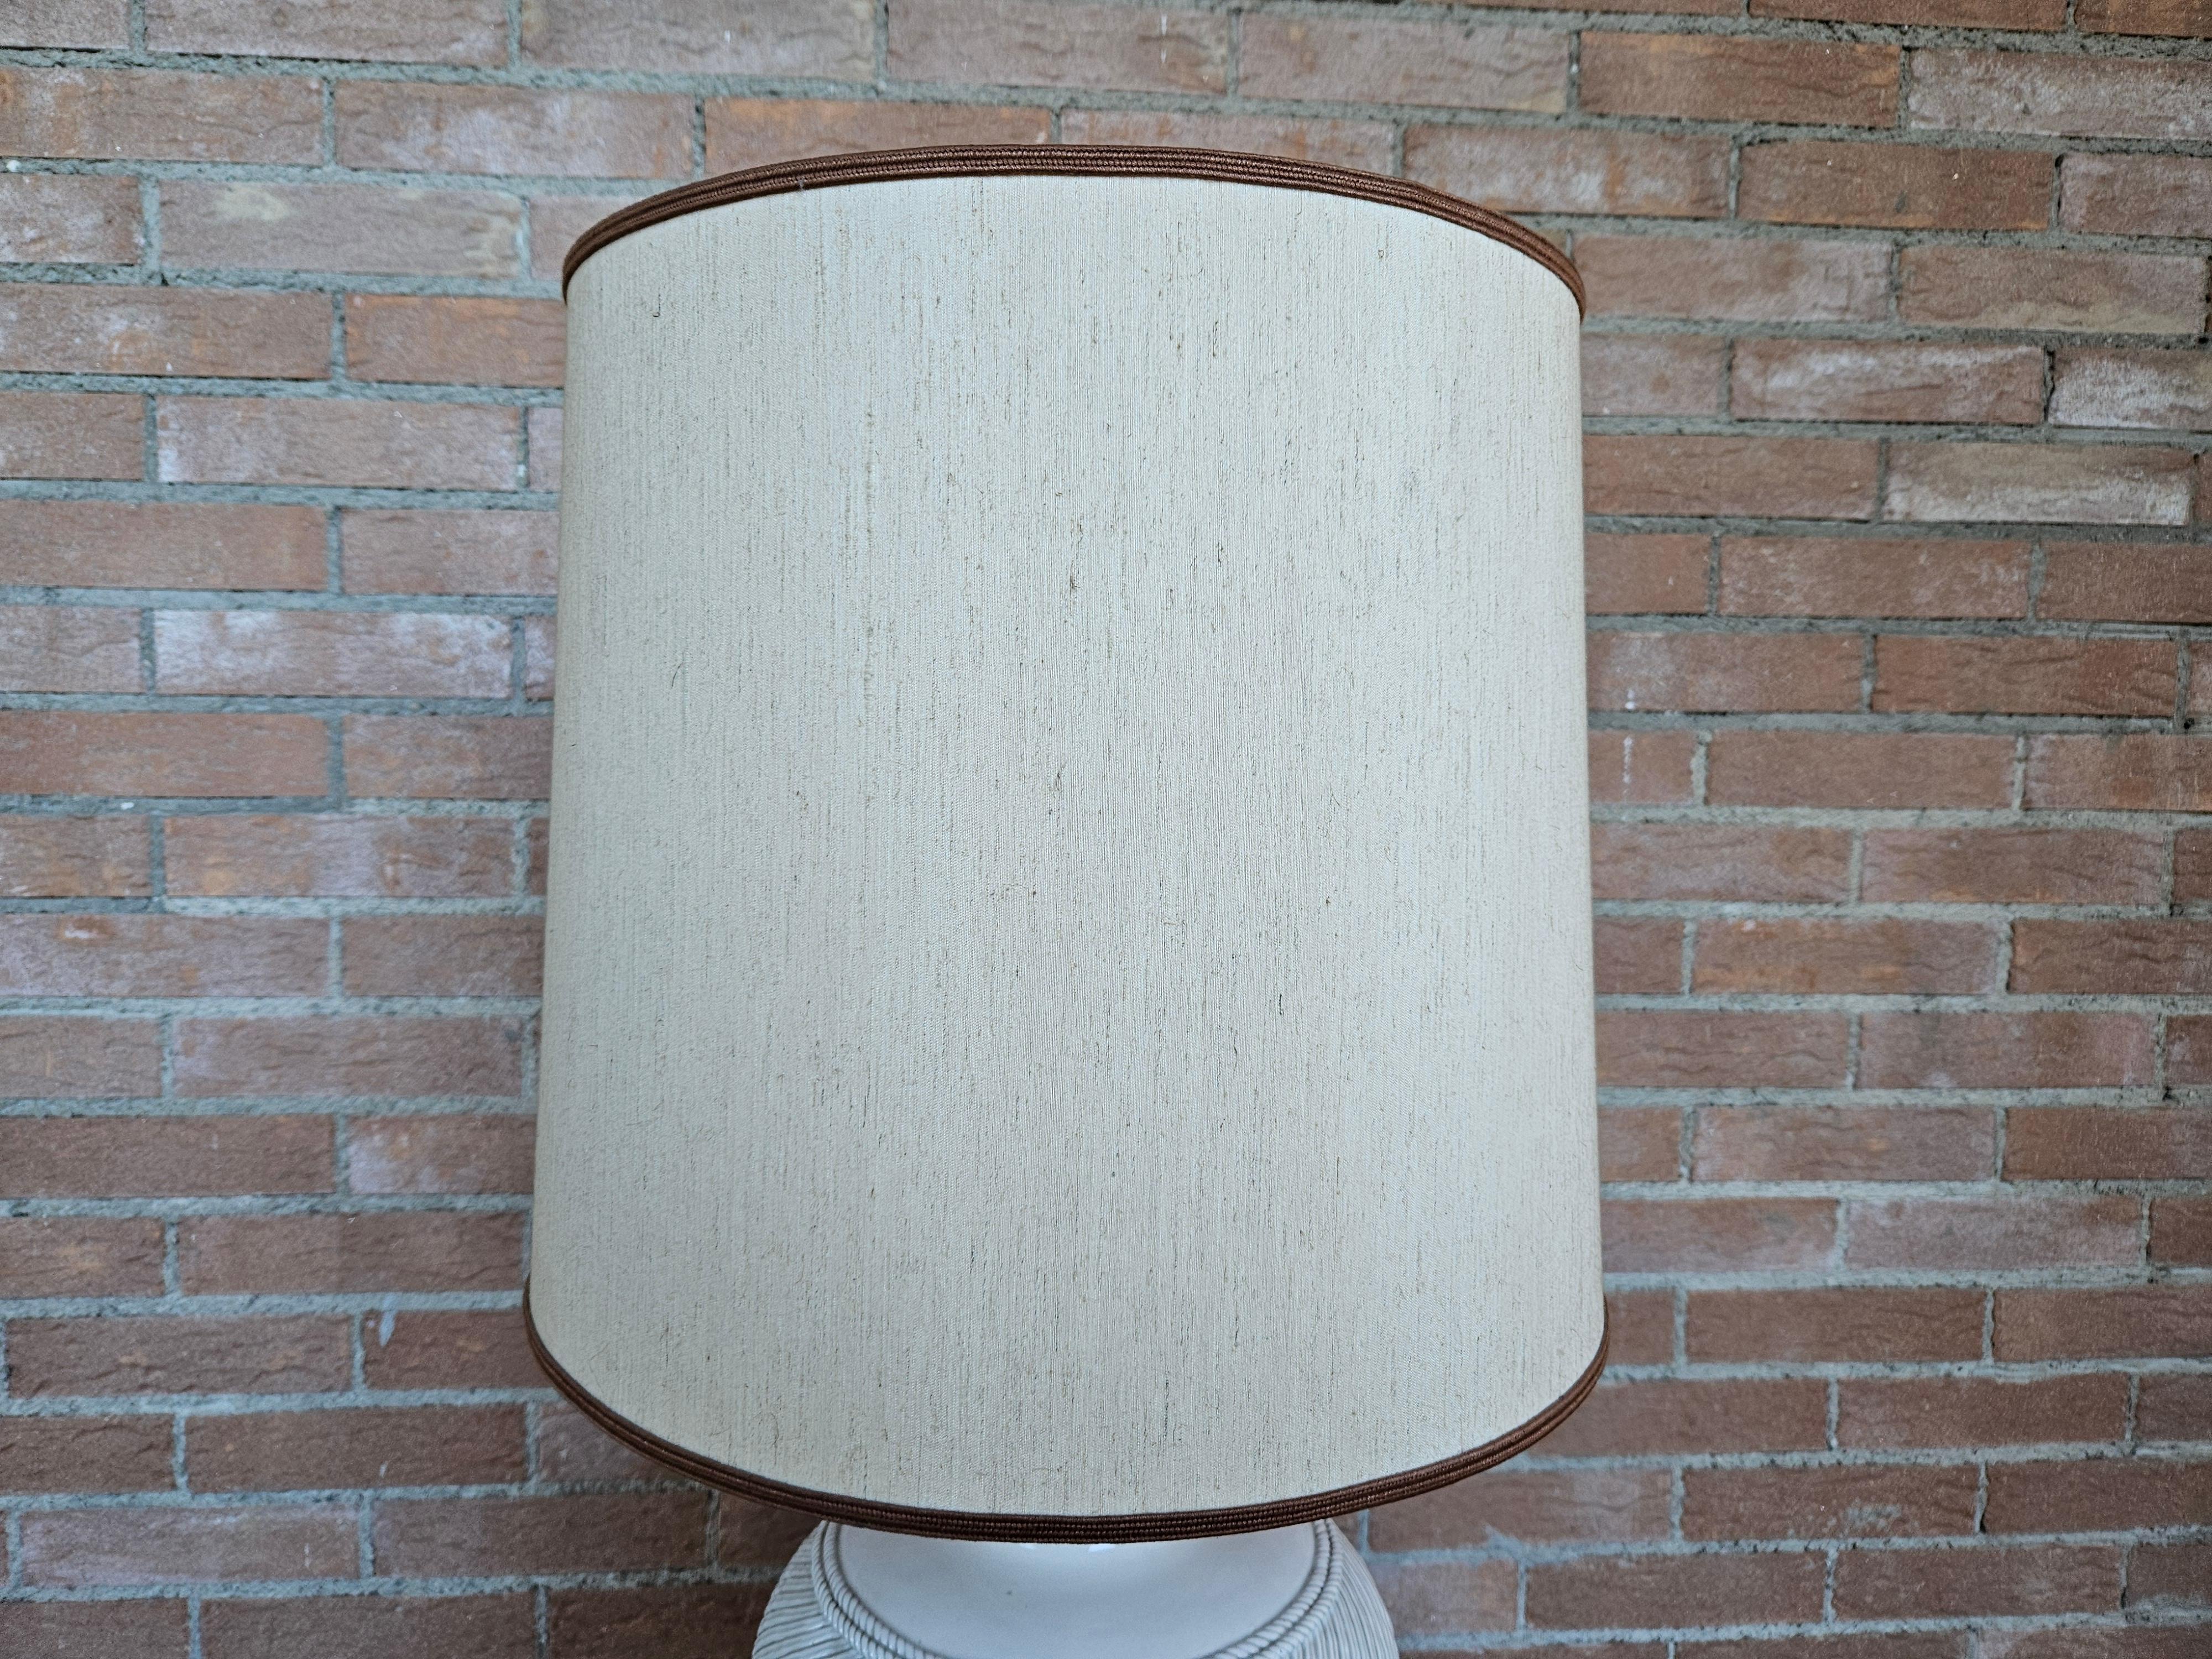 White machined ceramic table lamp with fabric shade.

Modern design furniture element, Italian production from the 1970s.

Bulb not included.
